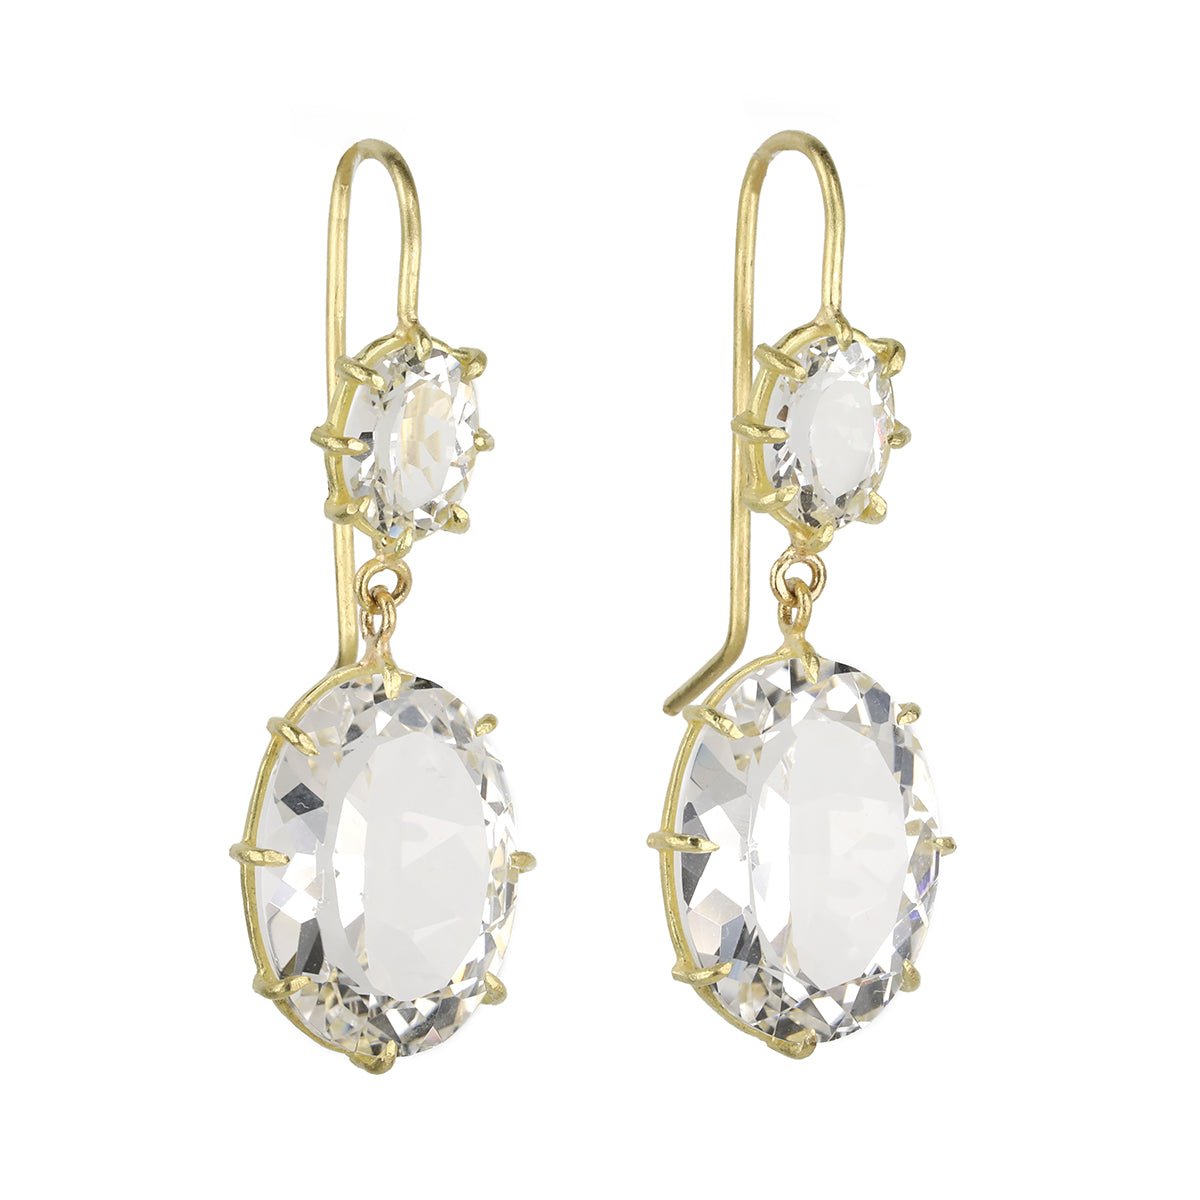 Rosanne Pugliese Gold and White Topaz Double Drop Earrings